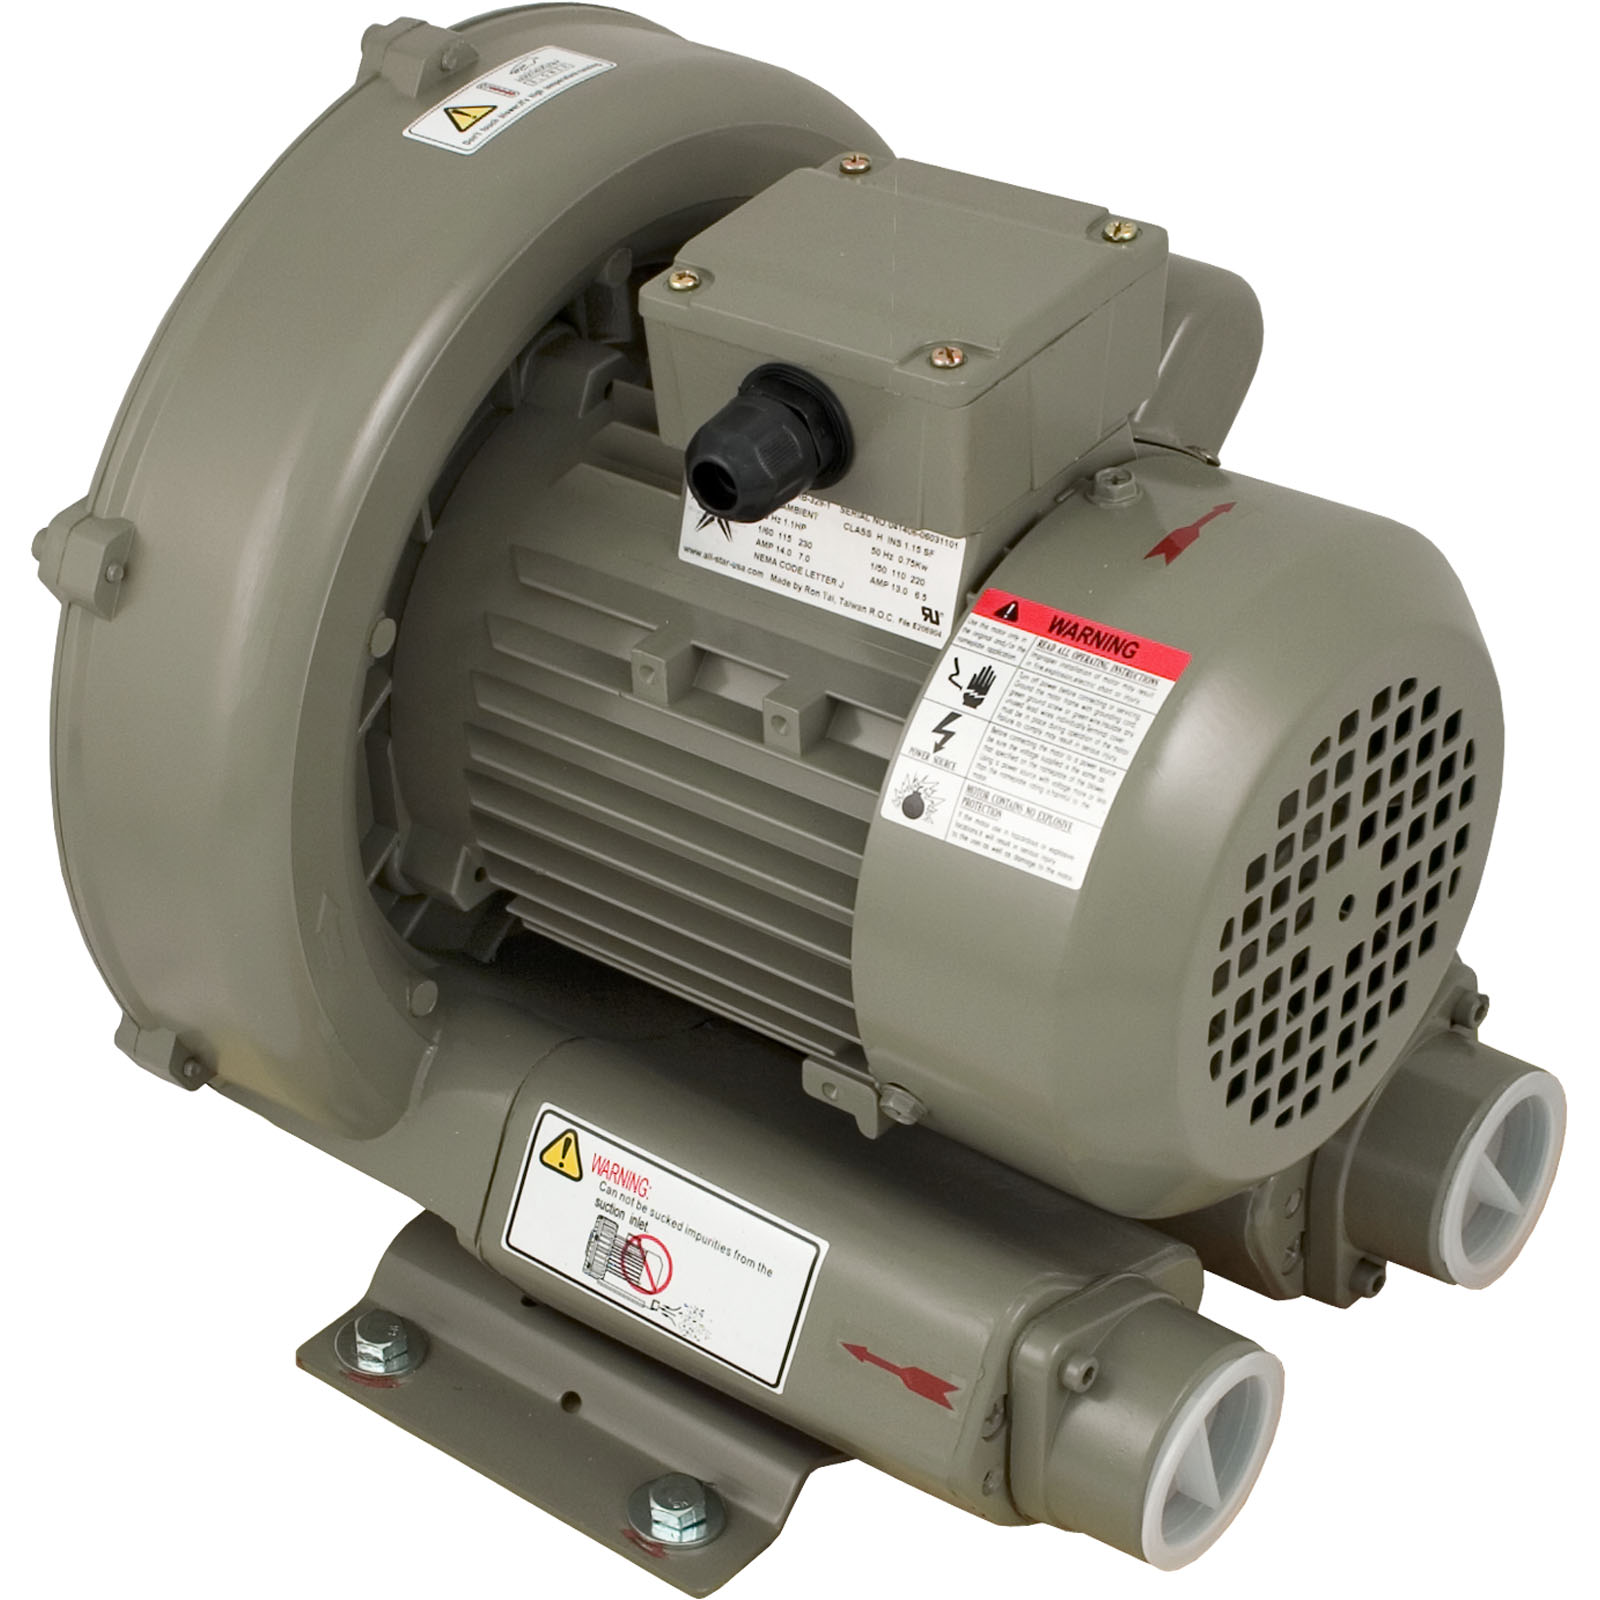 Picture of RBH3-101-1 Commercial Blower Duralast 1.0hp 230v Single Phase